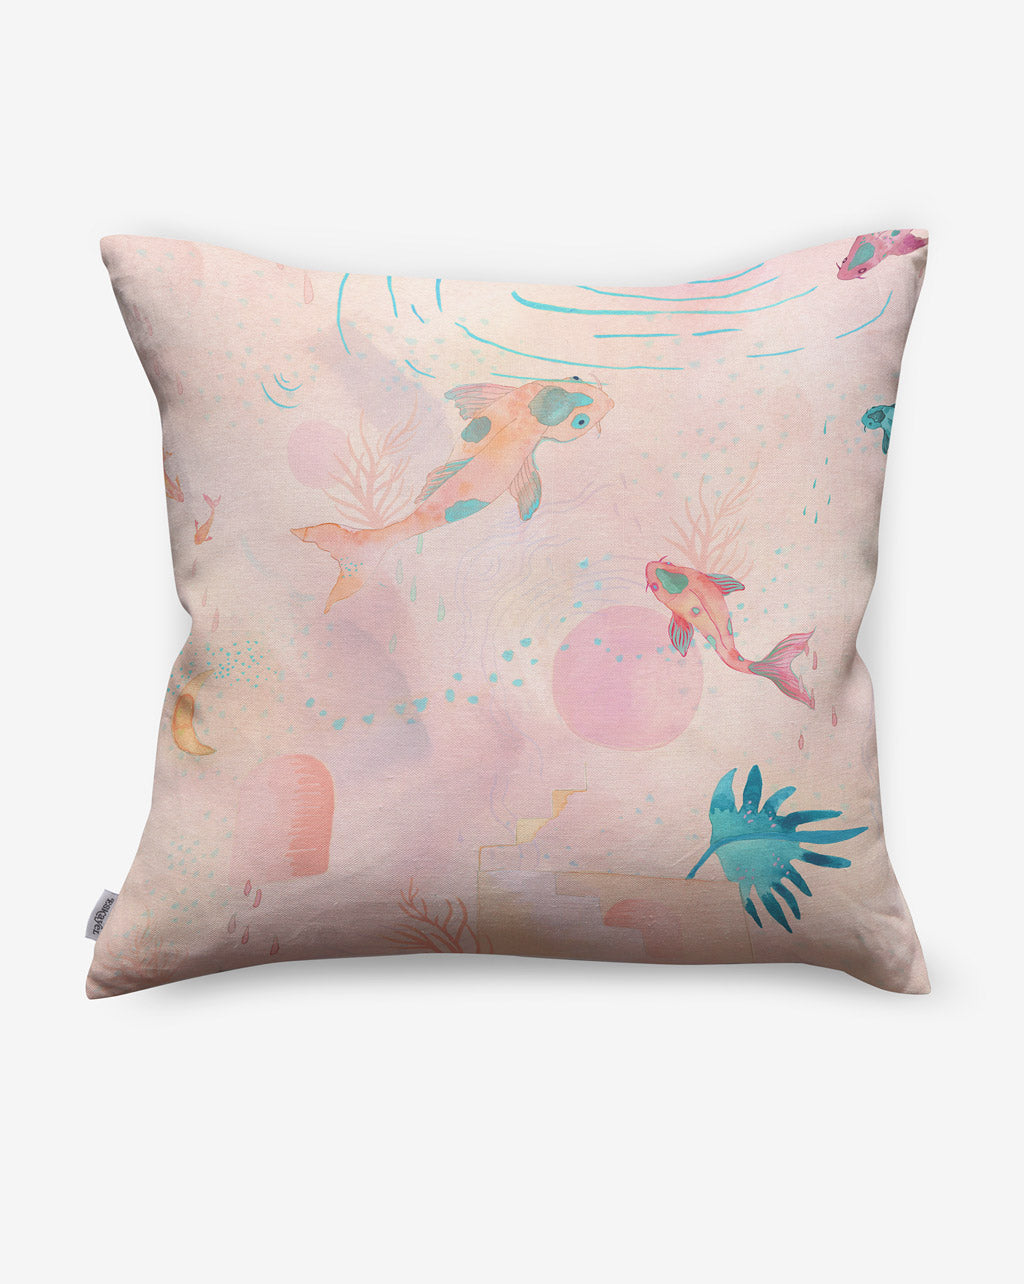 Water Signs Outdoor Pillow||Multi